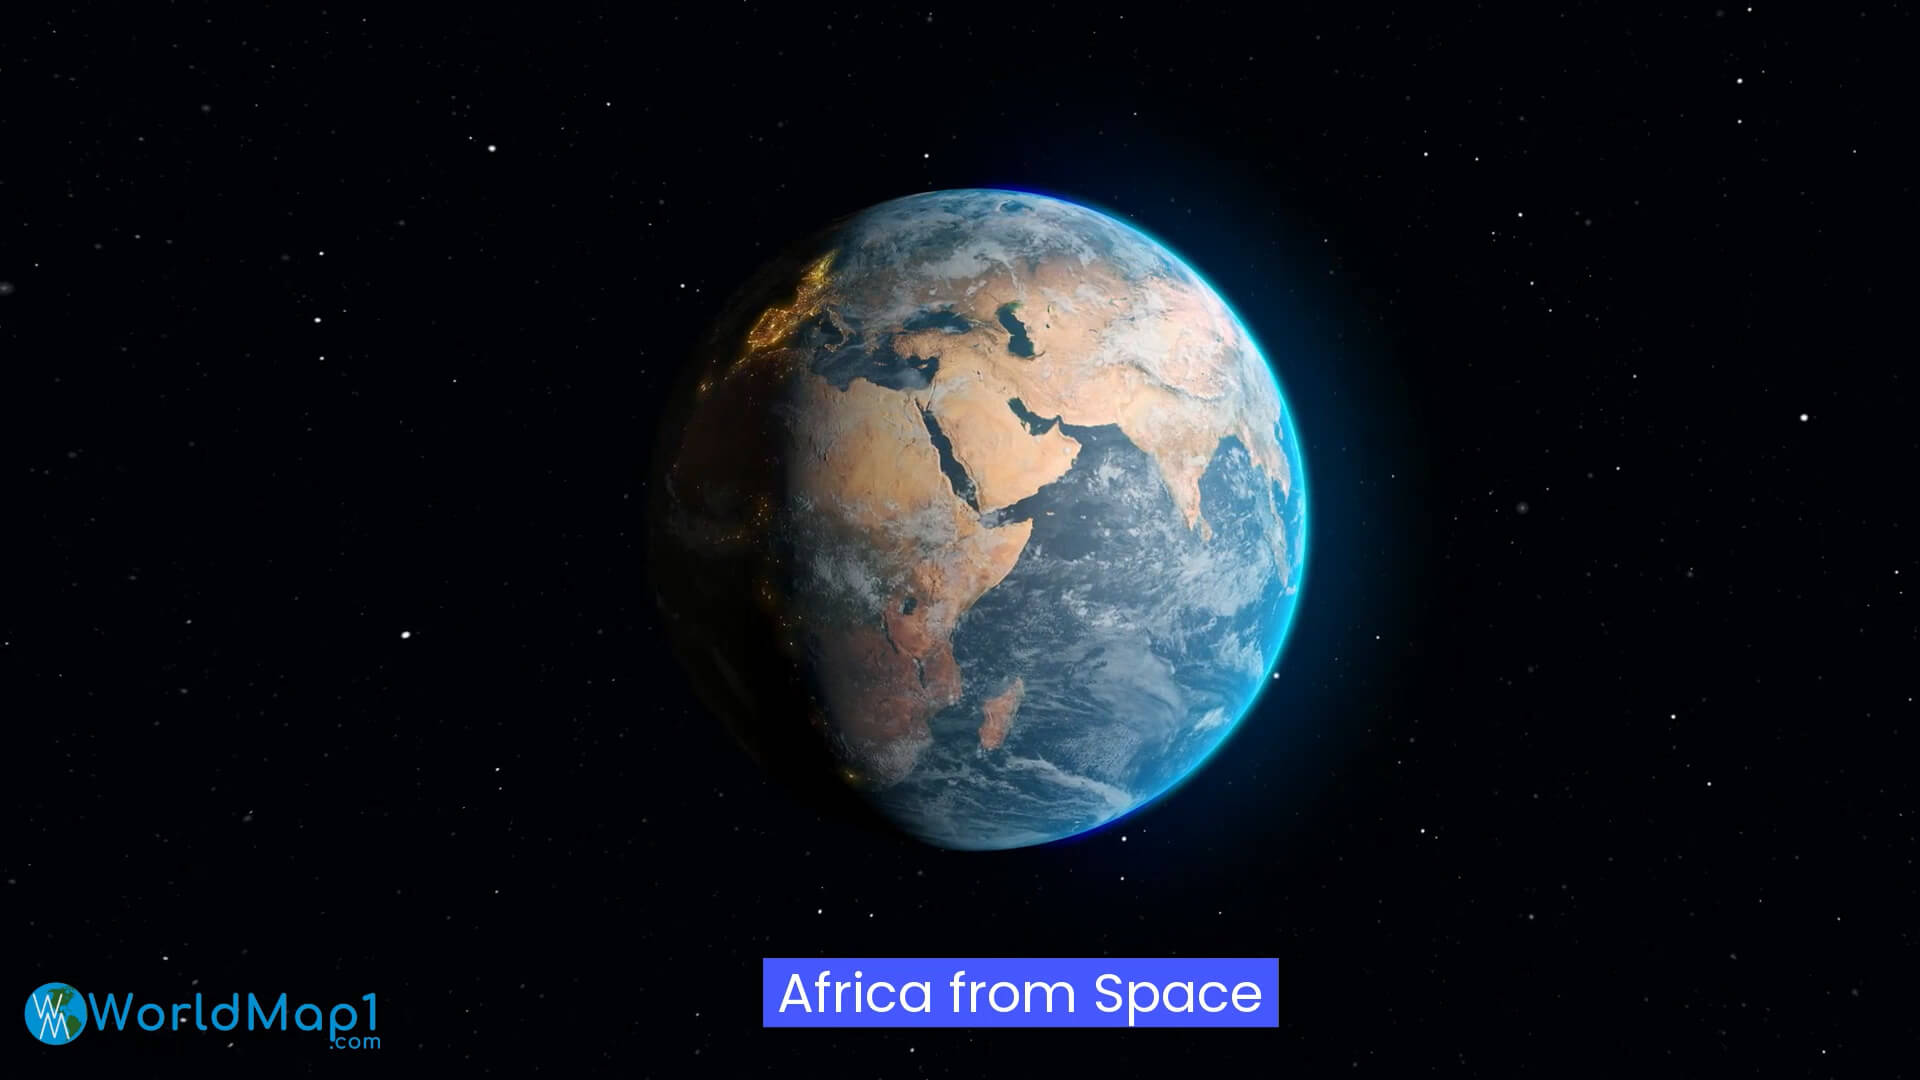 Africa from Space